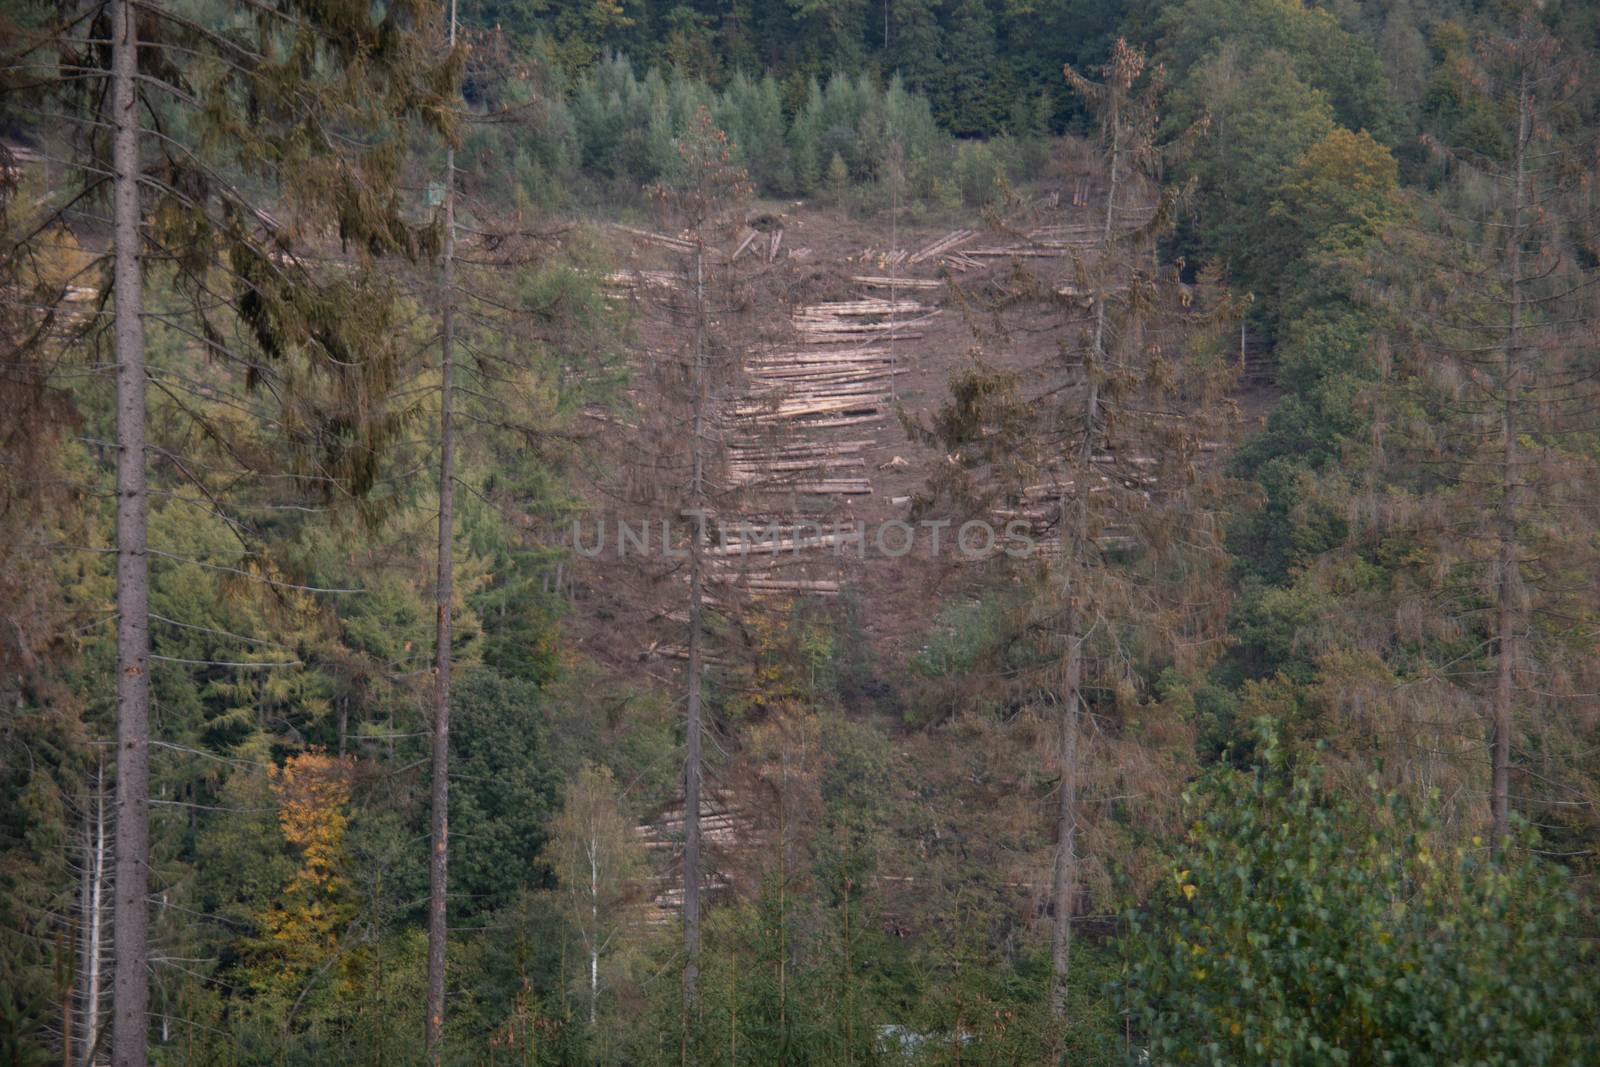 Logging work in the autumn coniferous forest